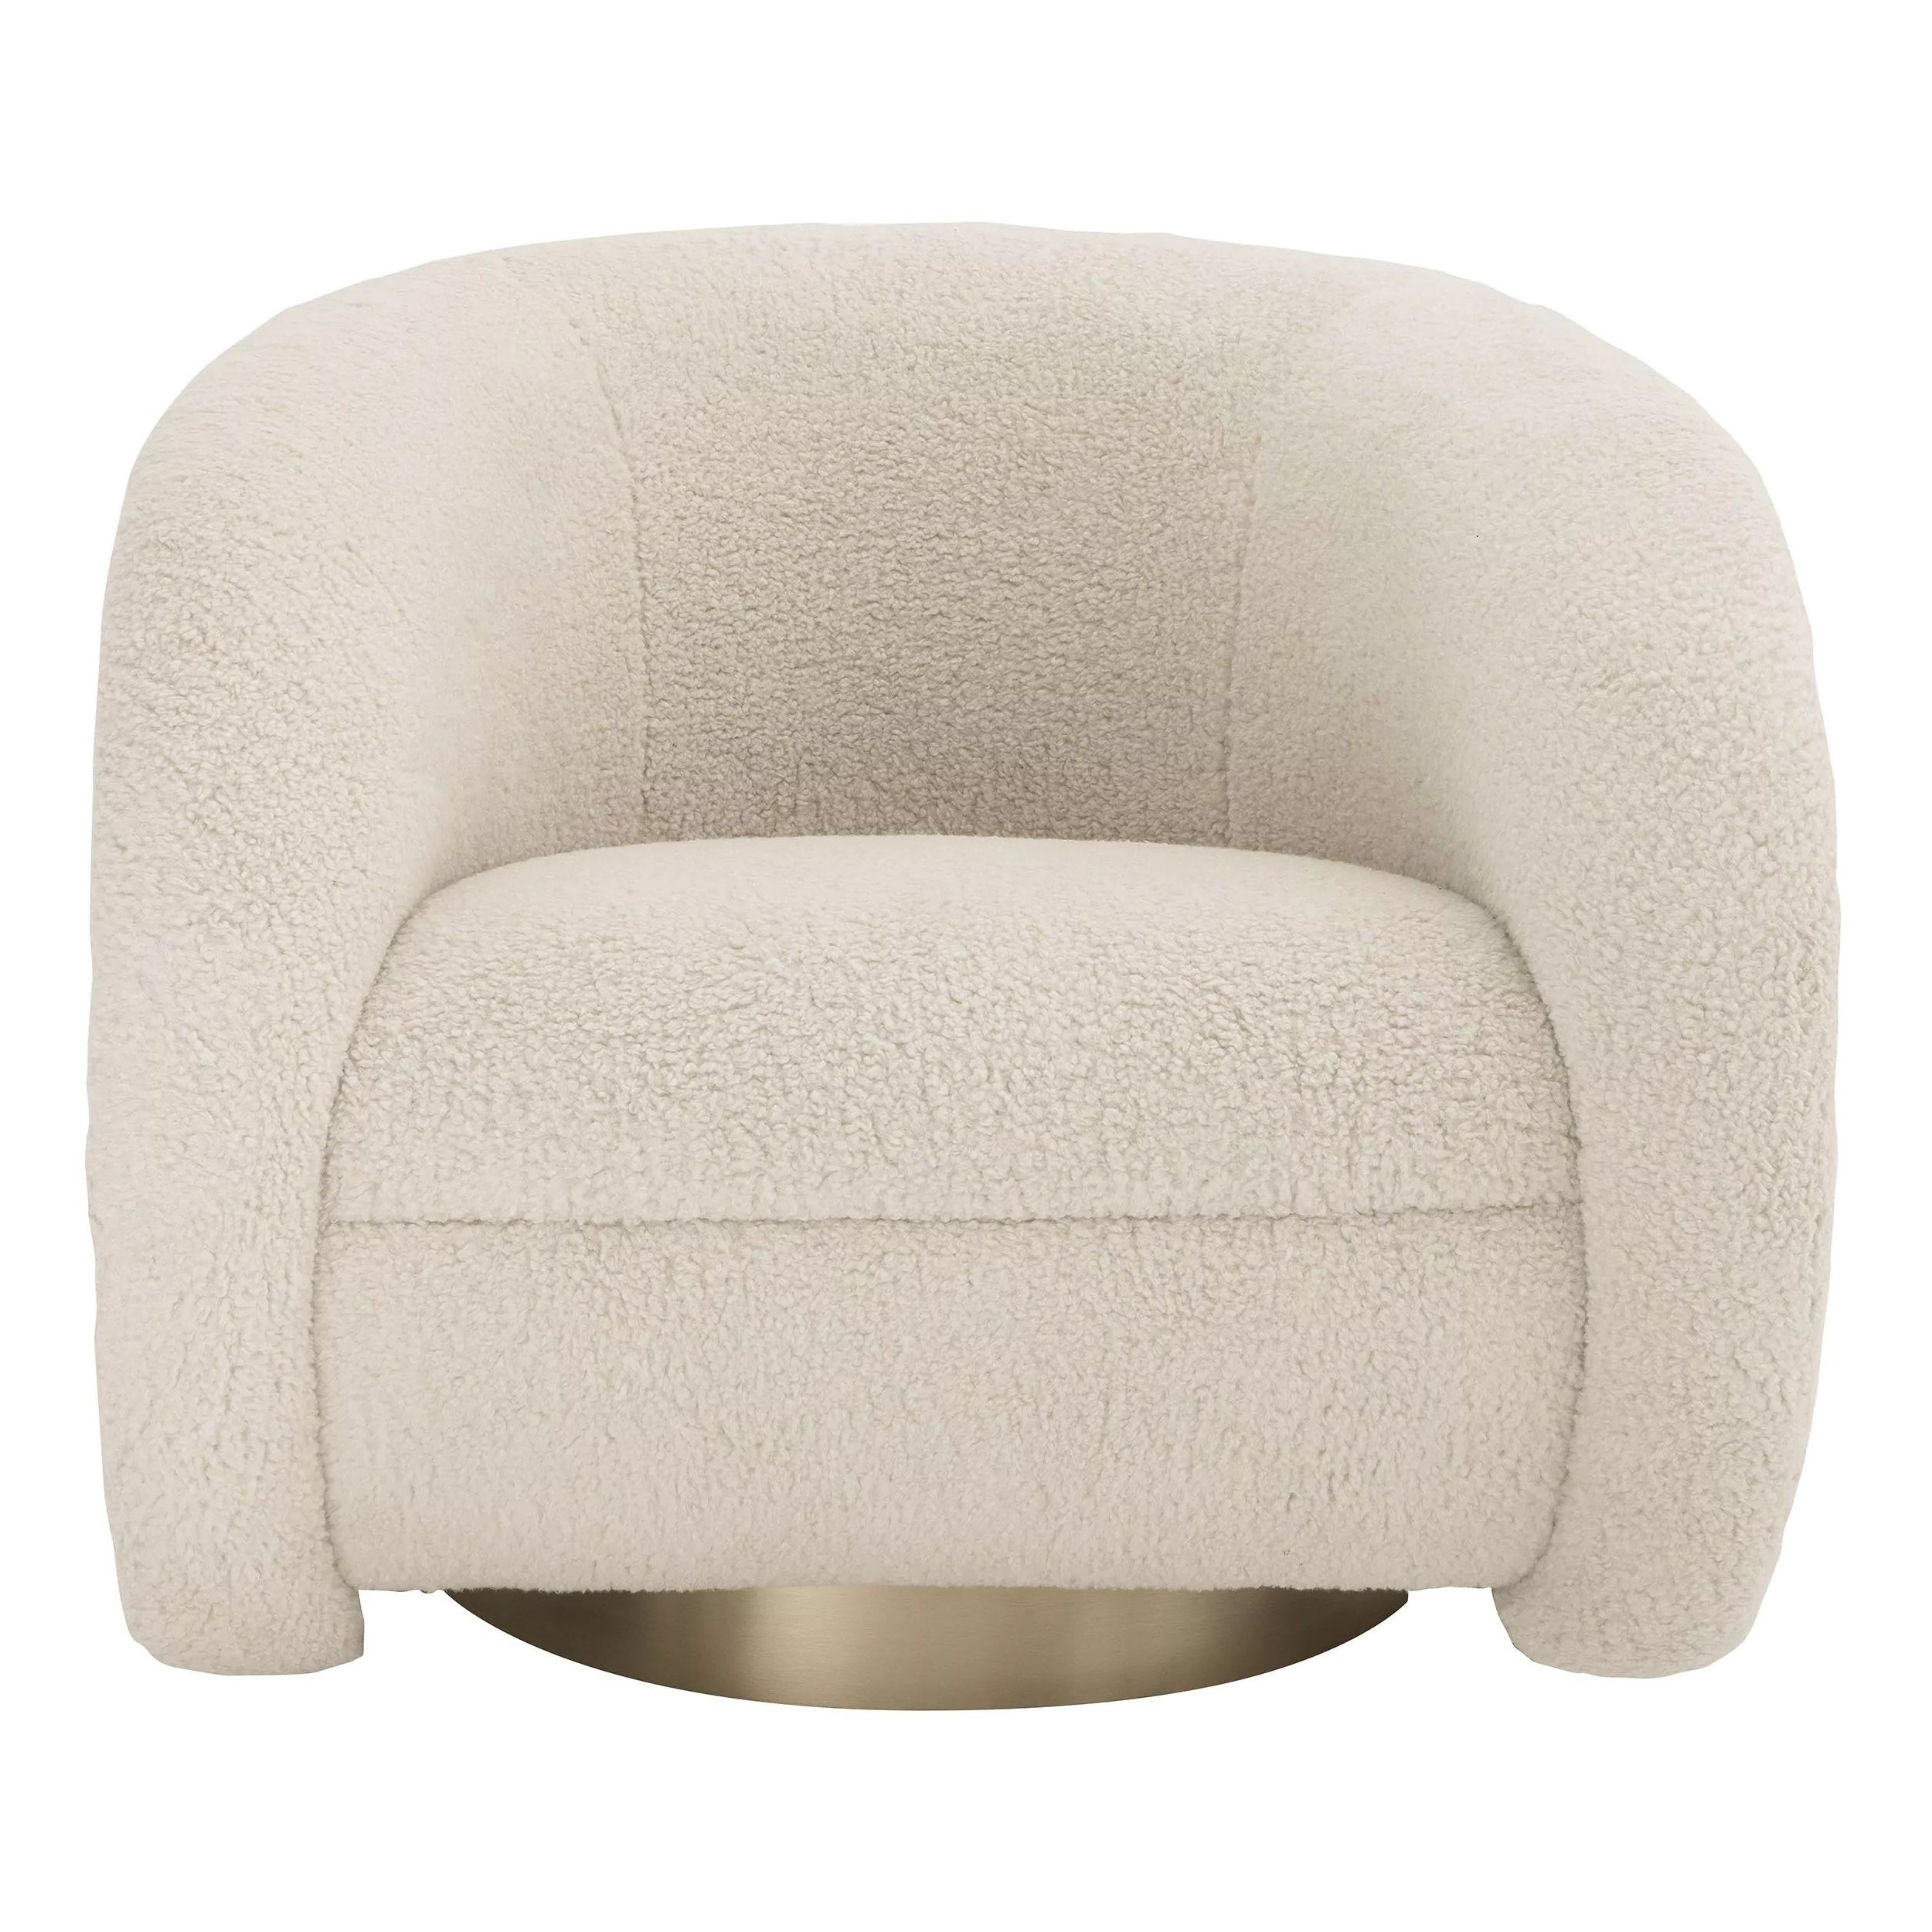 Beige Bouclé Fabric and Brass Finishes Swivel And Curved Armchair For Sale